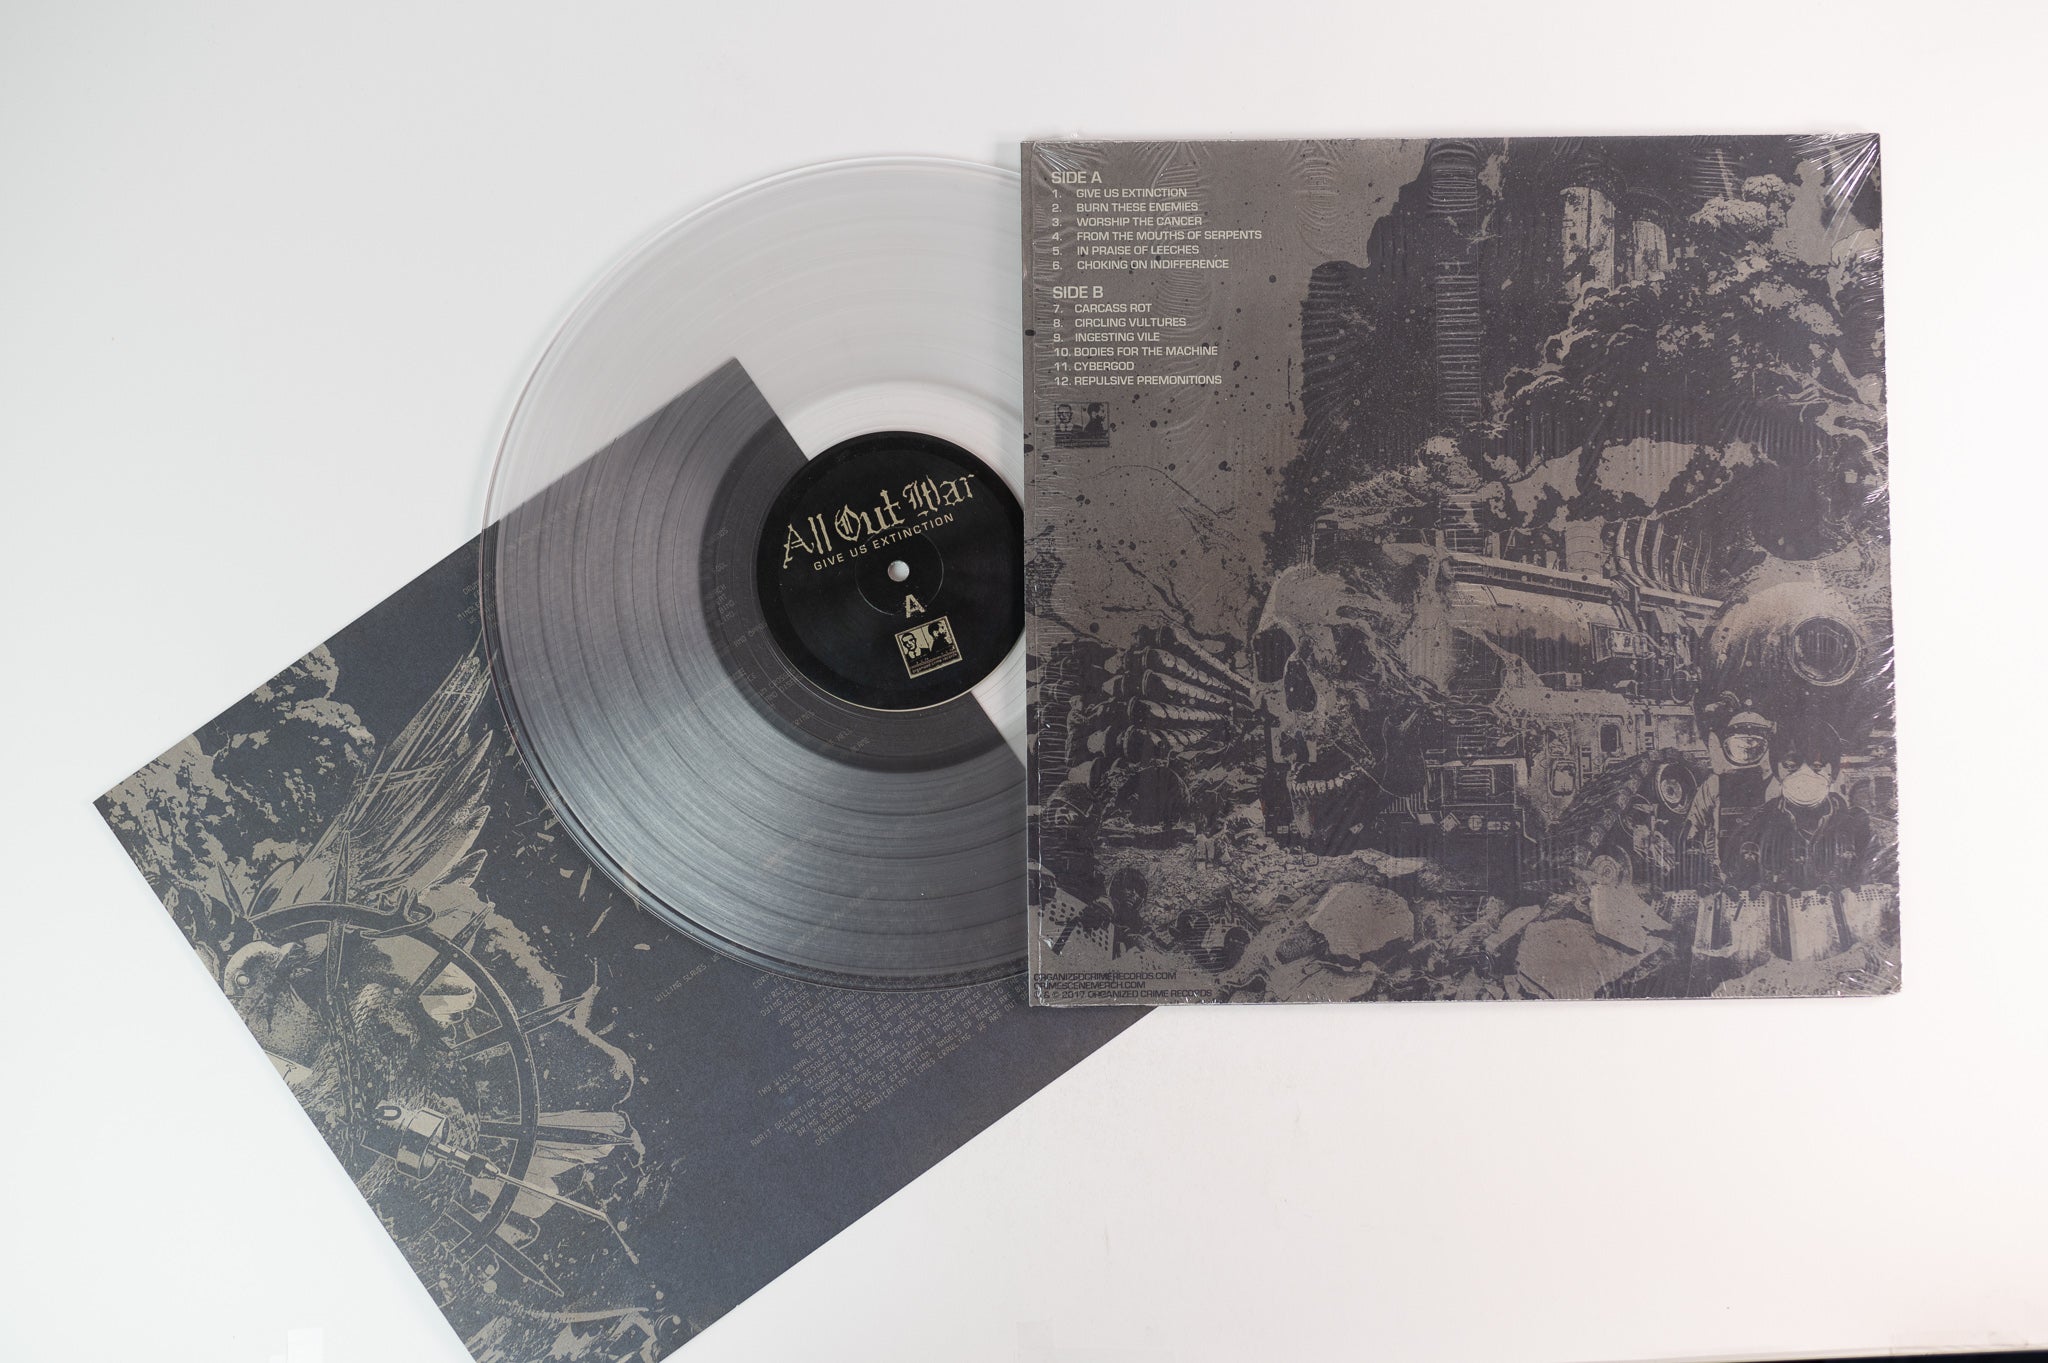 All Out War - Give Us Extinction on Organized Crime Records - Clear Vinyl